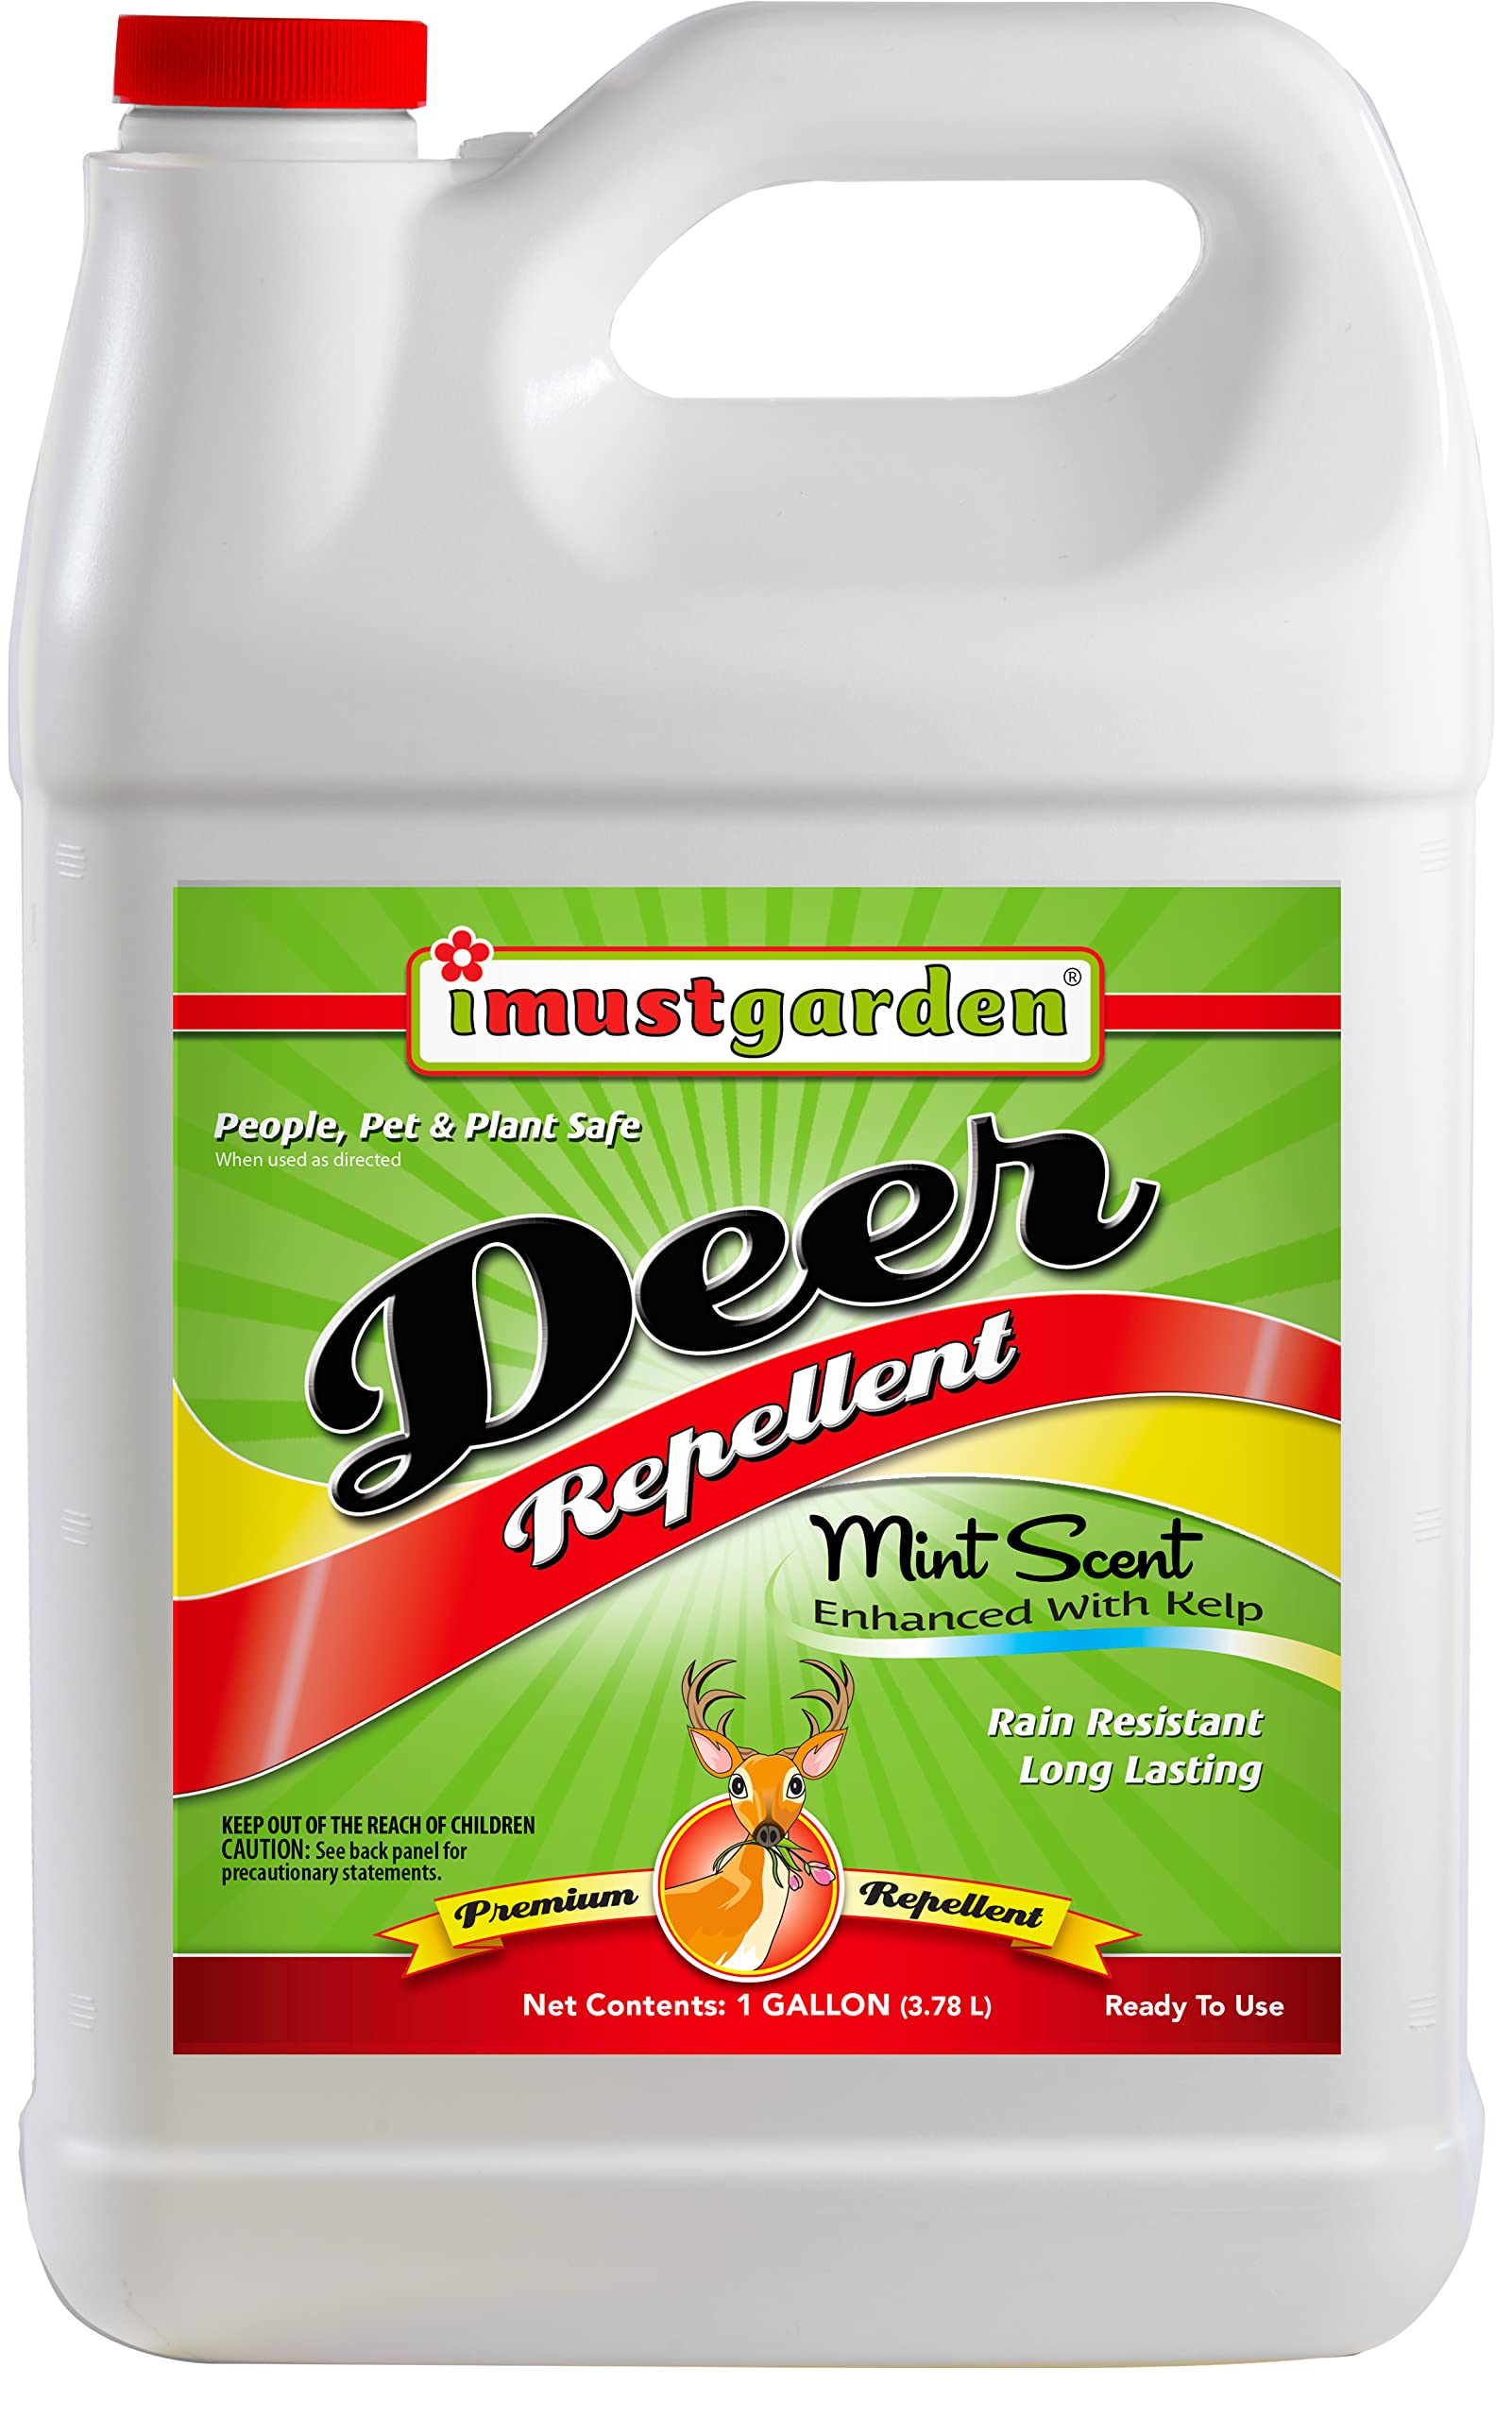 IMUSTGARDEN I Must Garden Deer Repellent: Mint Scent Deer Spray for Gardens & Plants - Natural Ingredients - 1 Gallon Ready to Use Refill